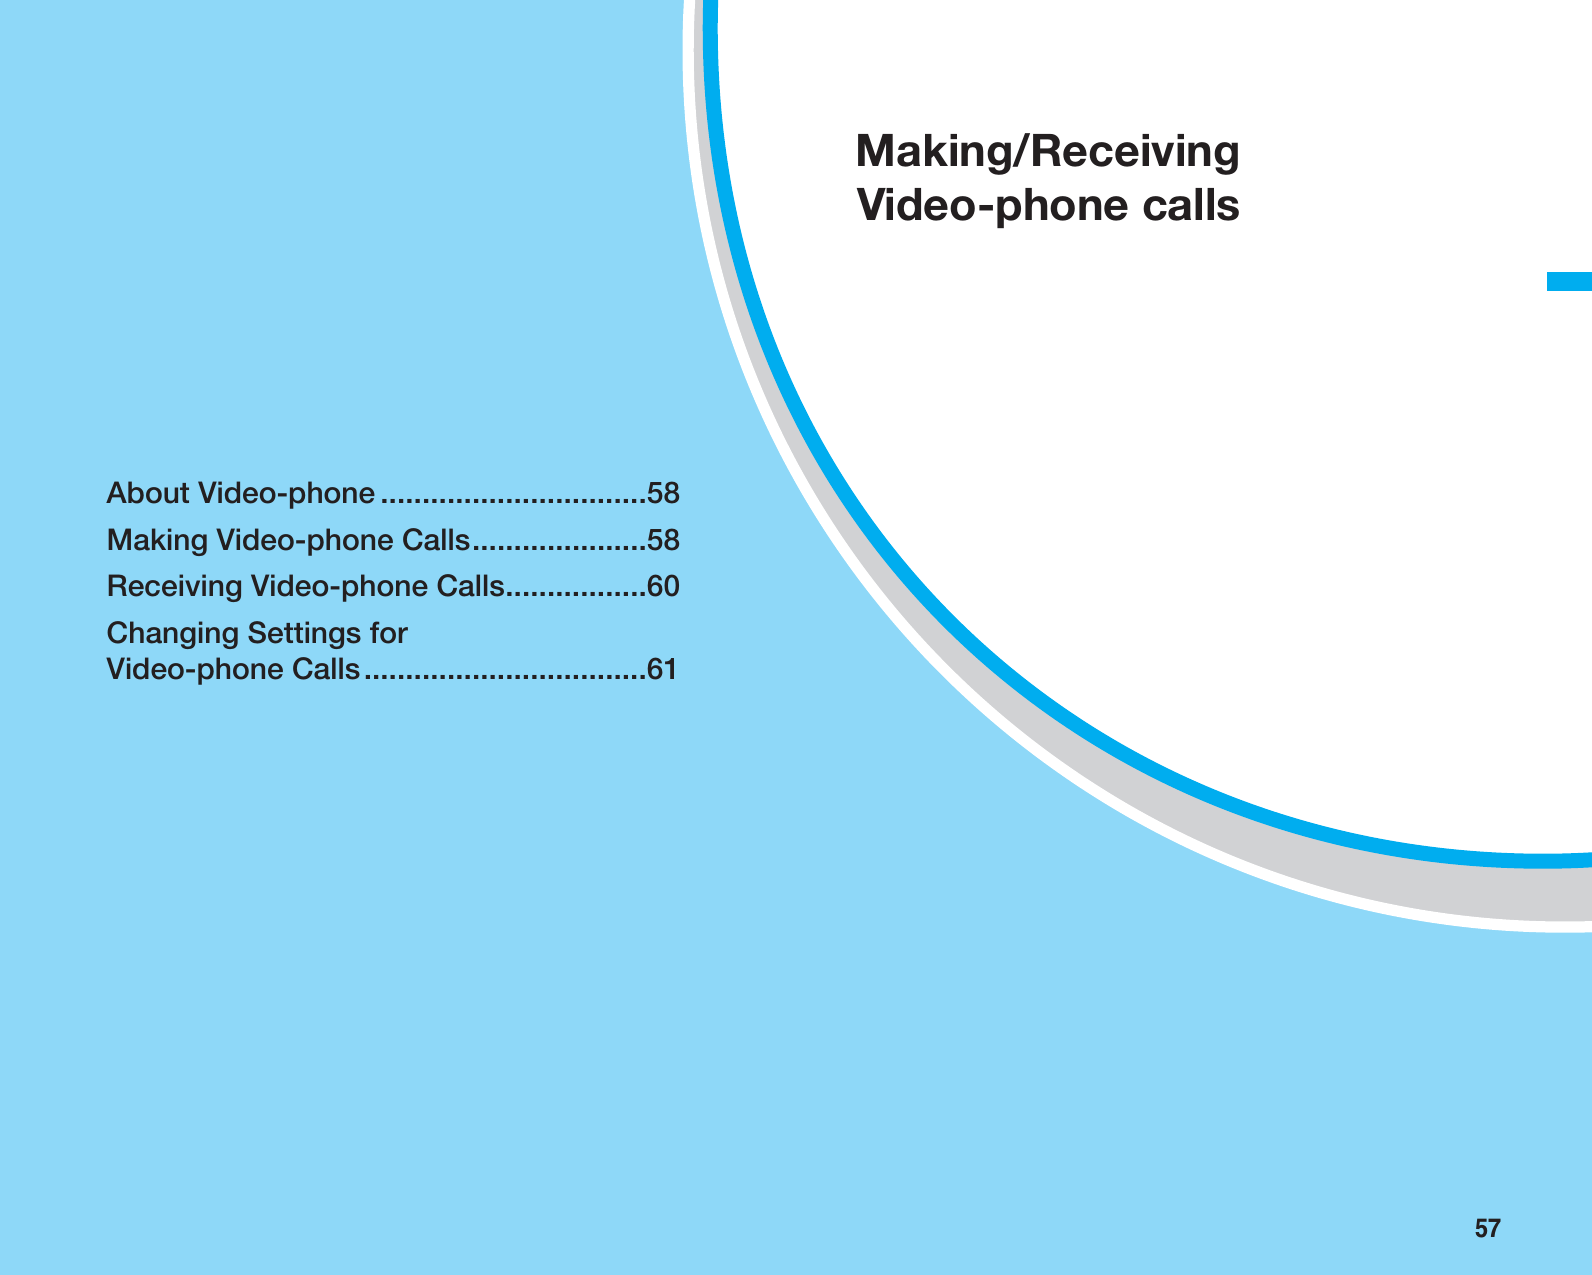 57About Video-phone ................................58Making Video-phone Calls.....................58Receiving Video-phone Calls.................60Changing Settings for Video-phone Calls..................................61Making/ReceivingVideo-phone calls